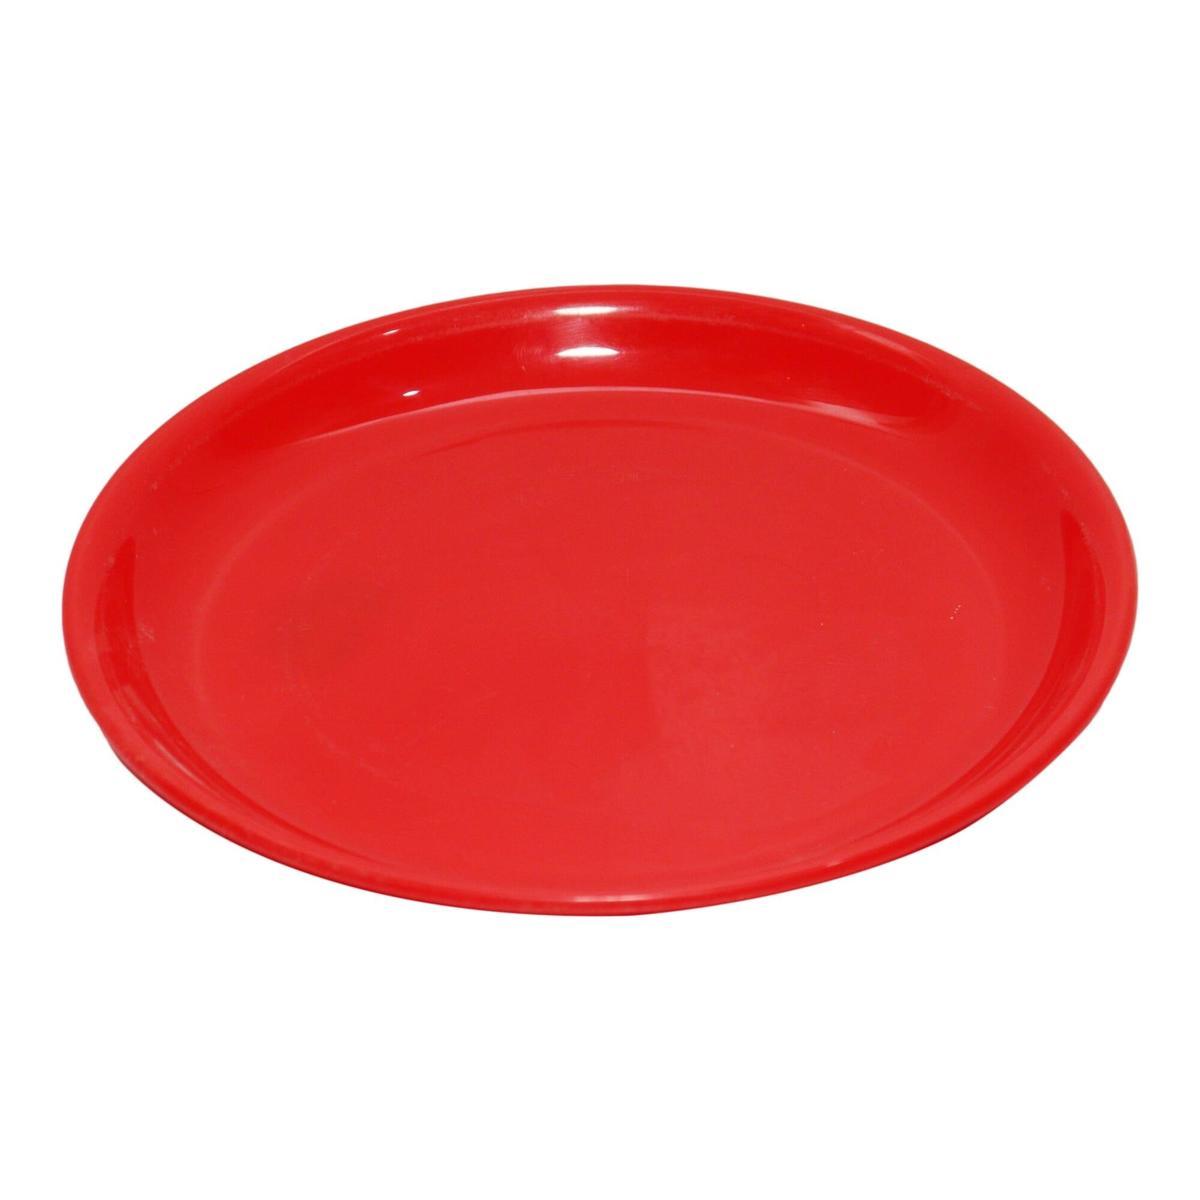 red colored plain design plate